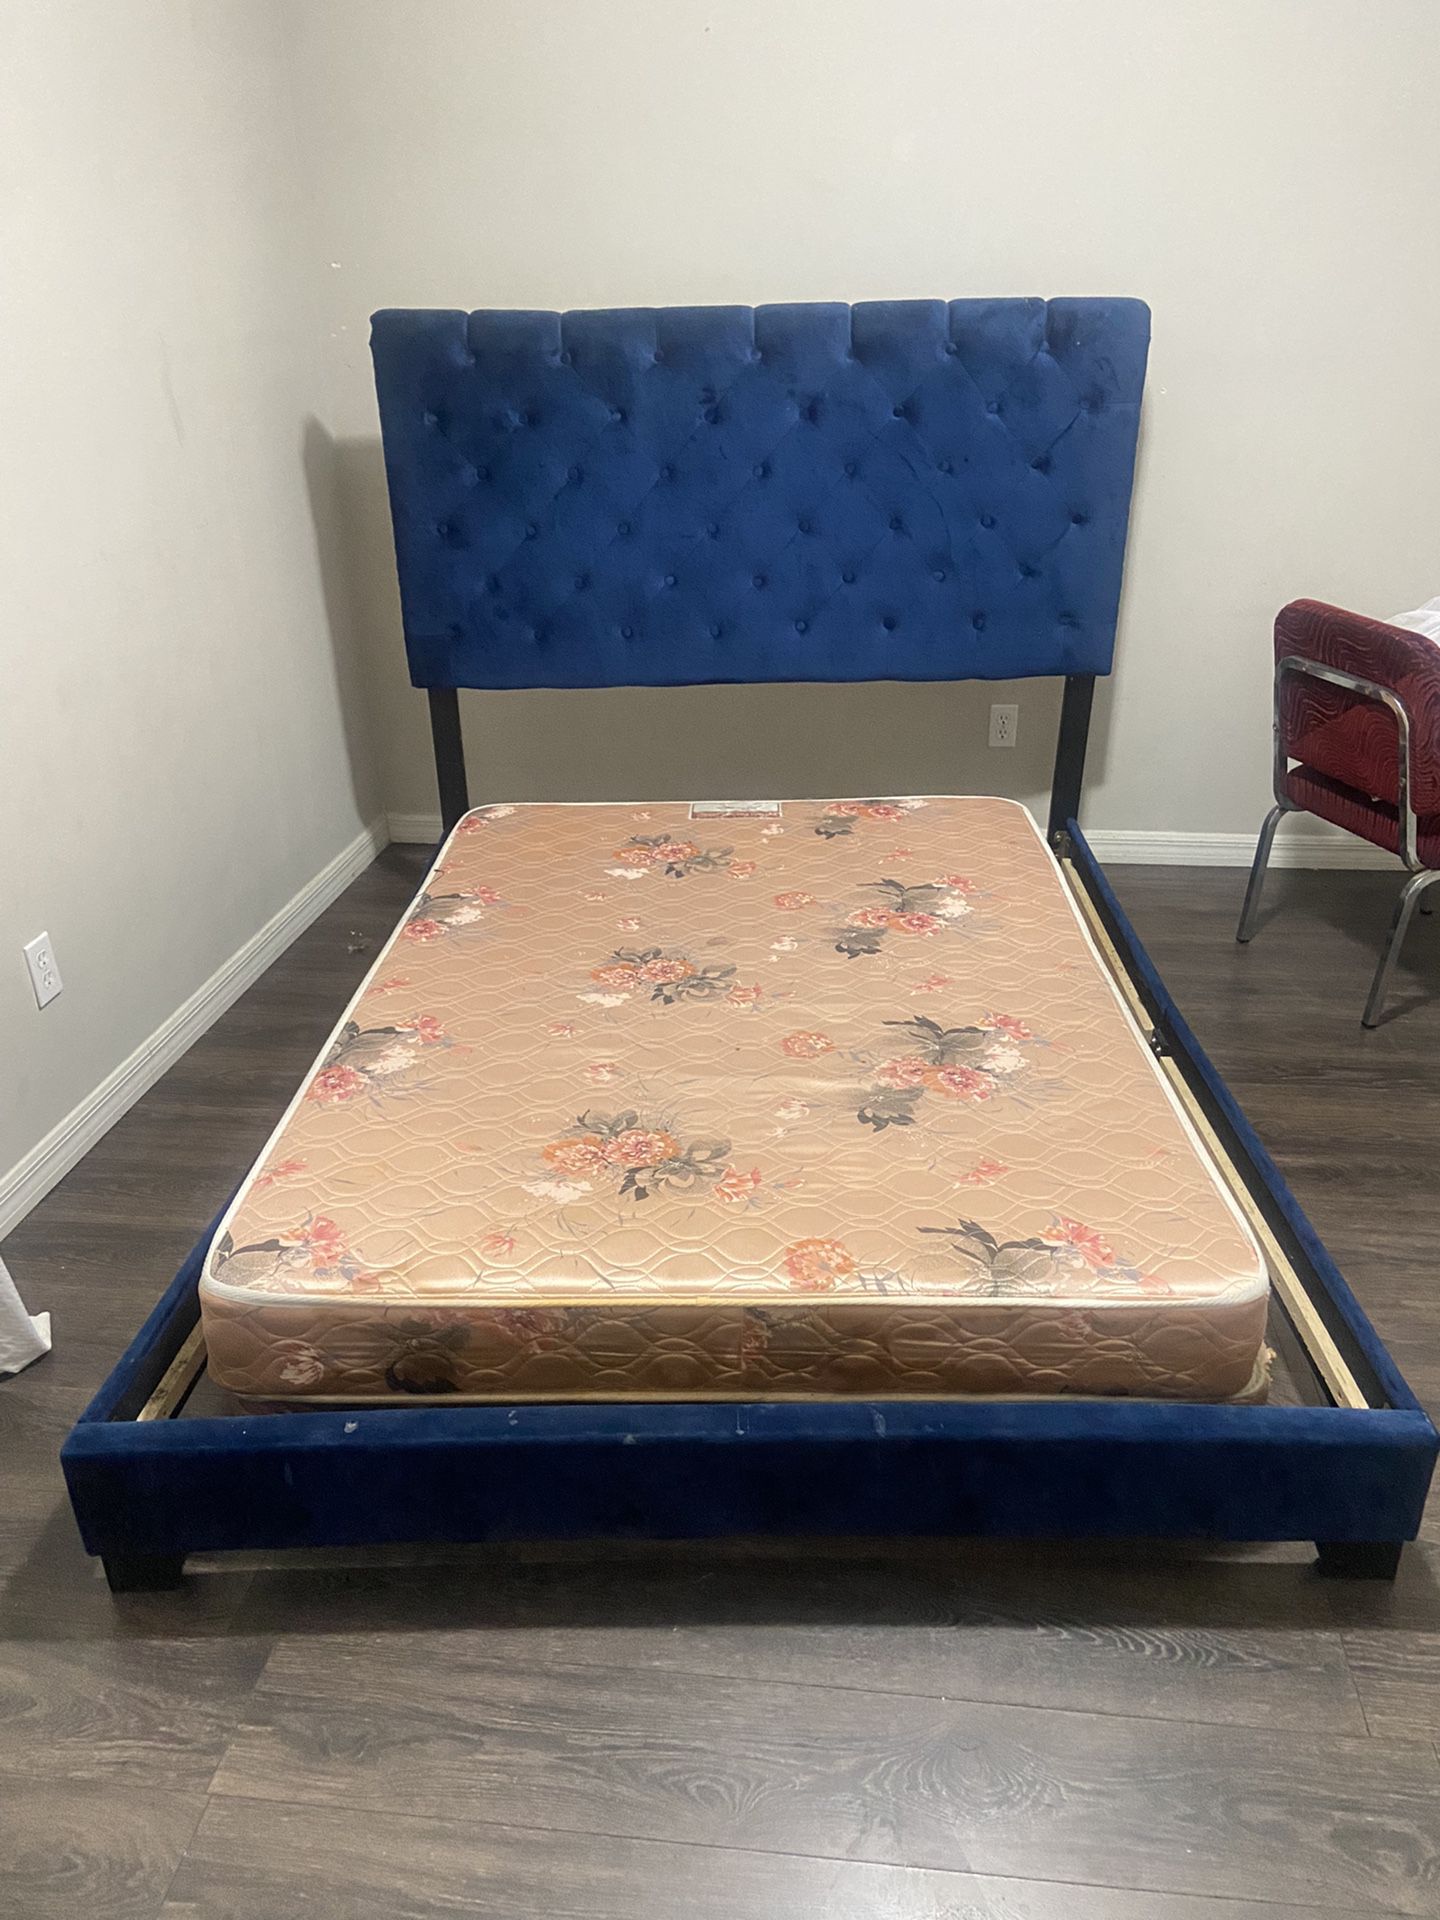 bed frame and box spring 